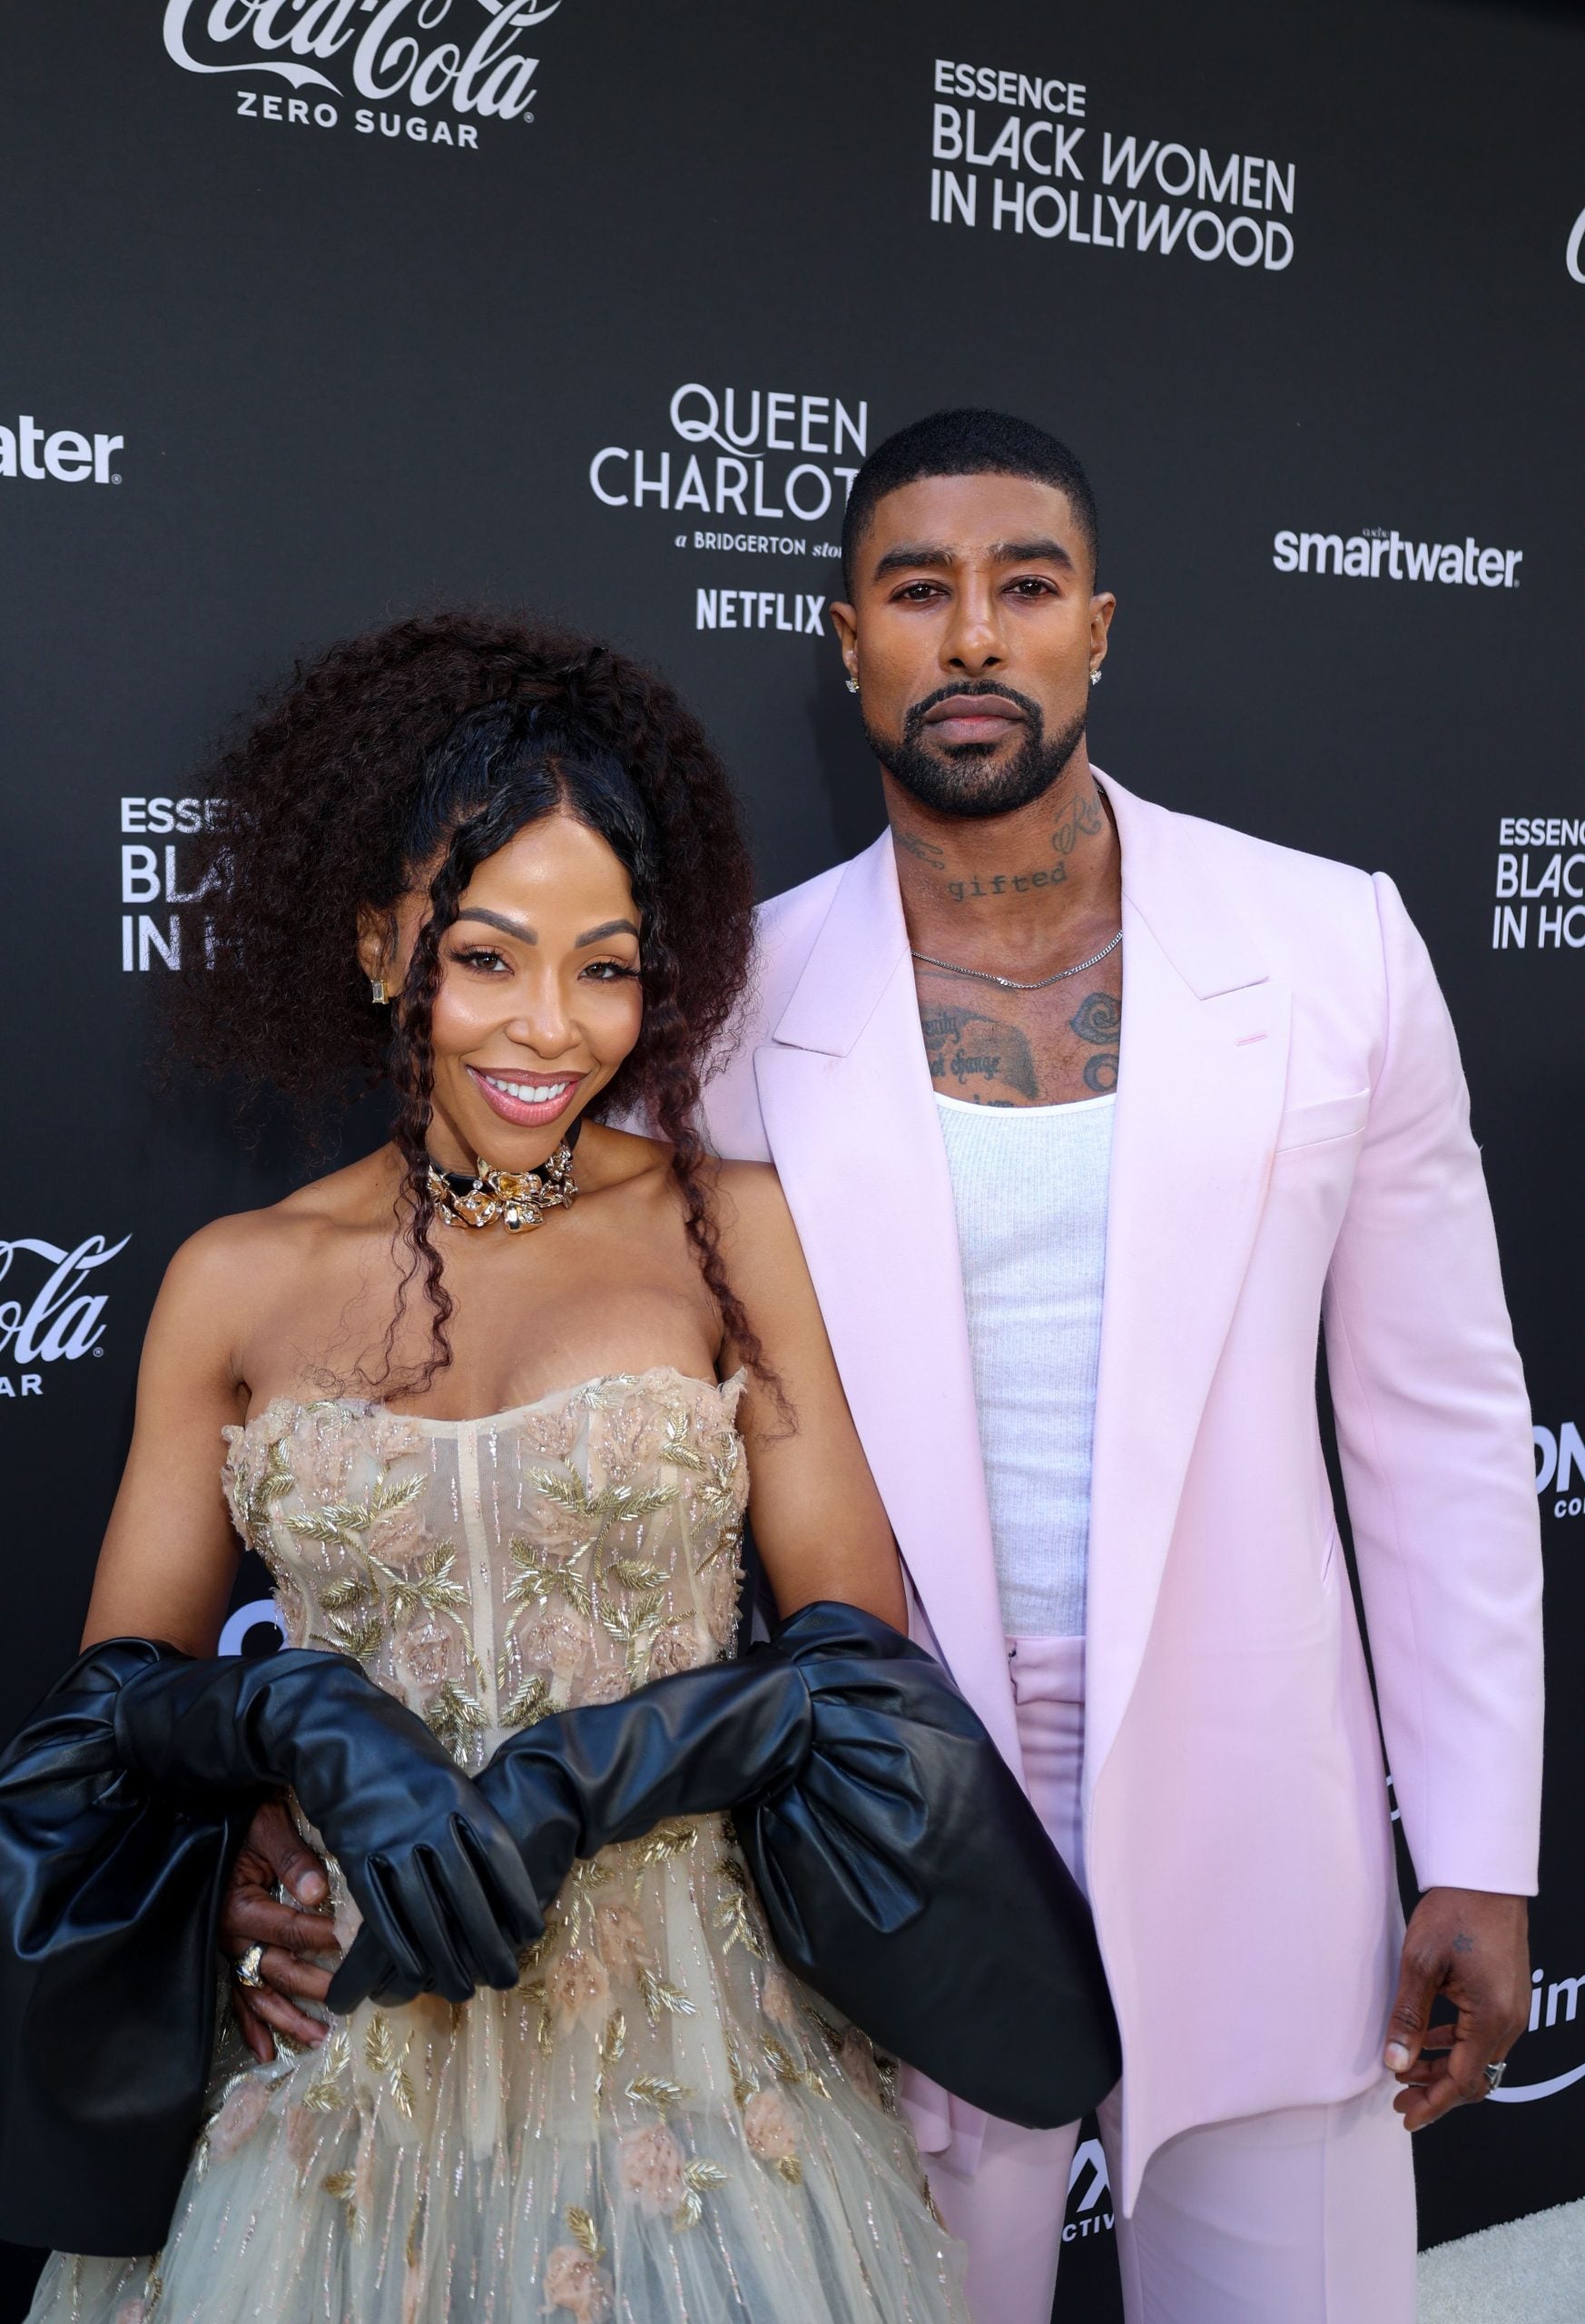 Black Love Was In The Air At The 16th Annual ESSENCE Black Women in Hollywood Awards Luncheon